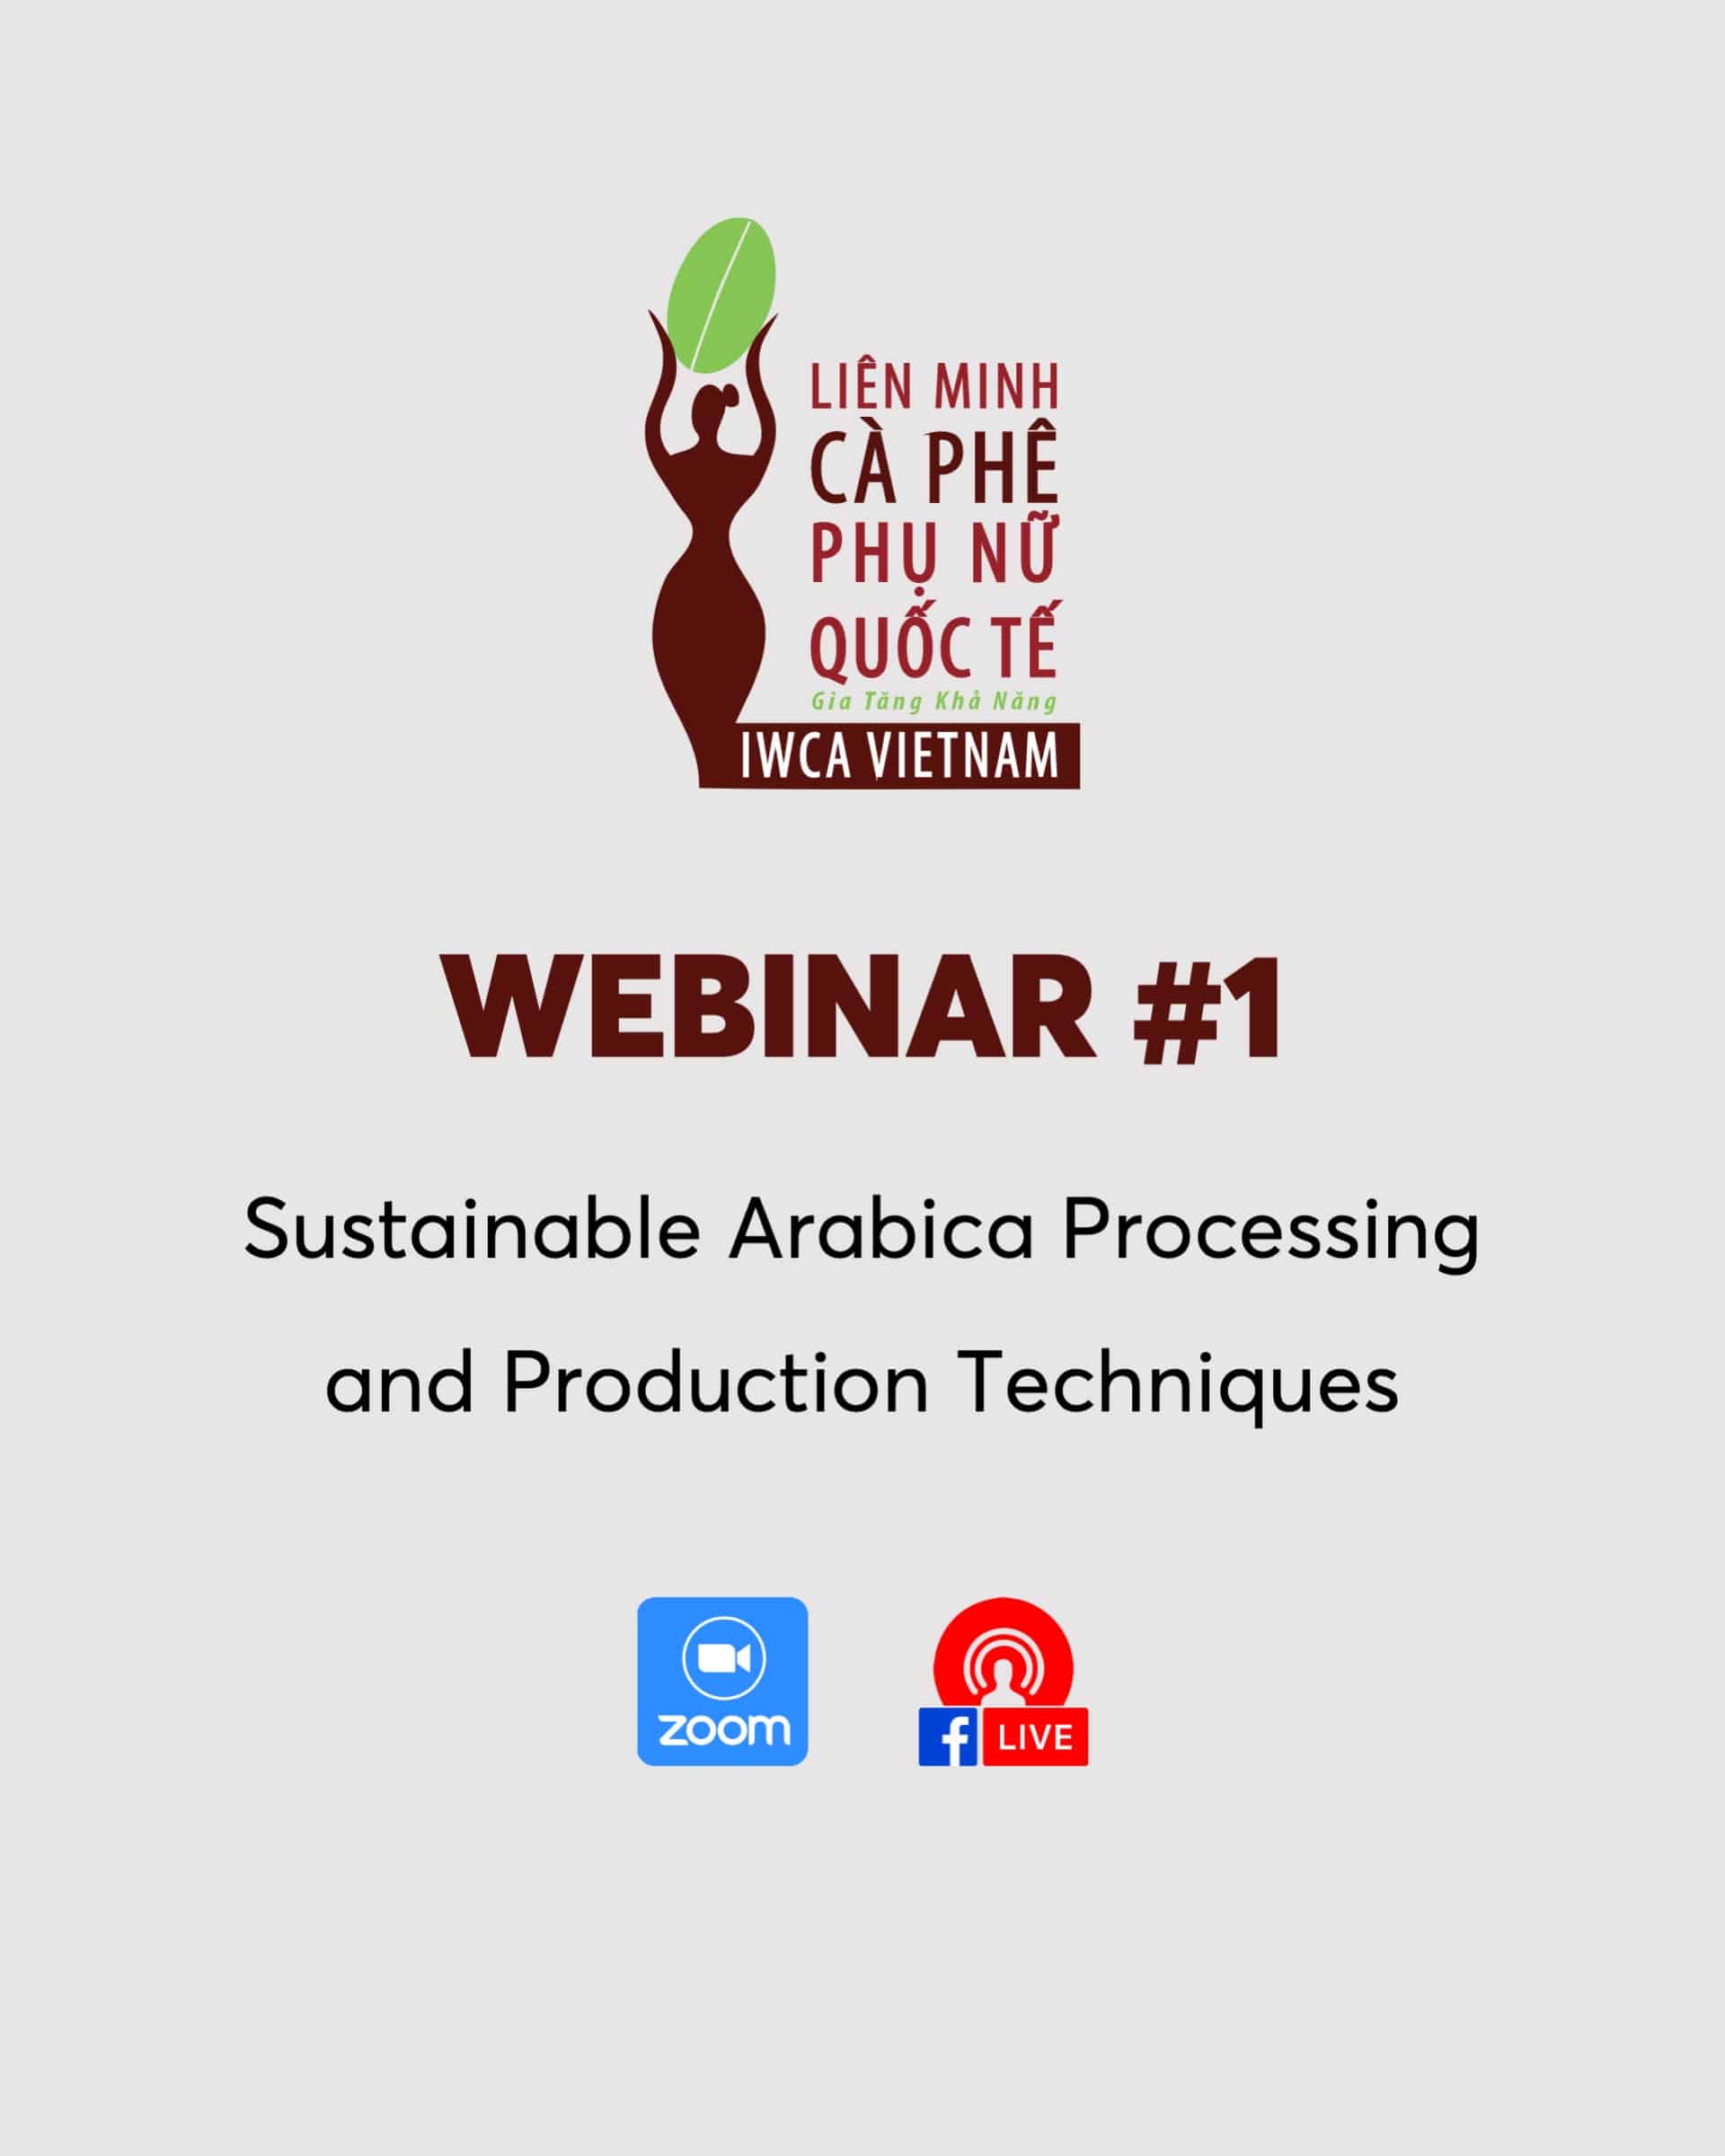 Webinar #1: Sustainable Arabica Processing and Production Techniques